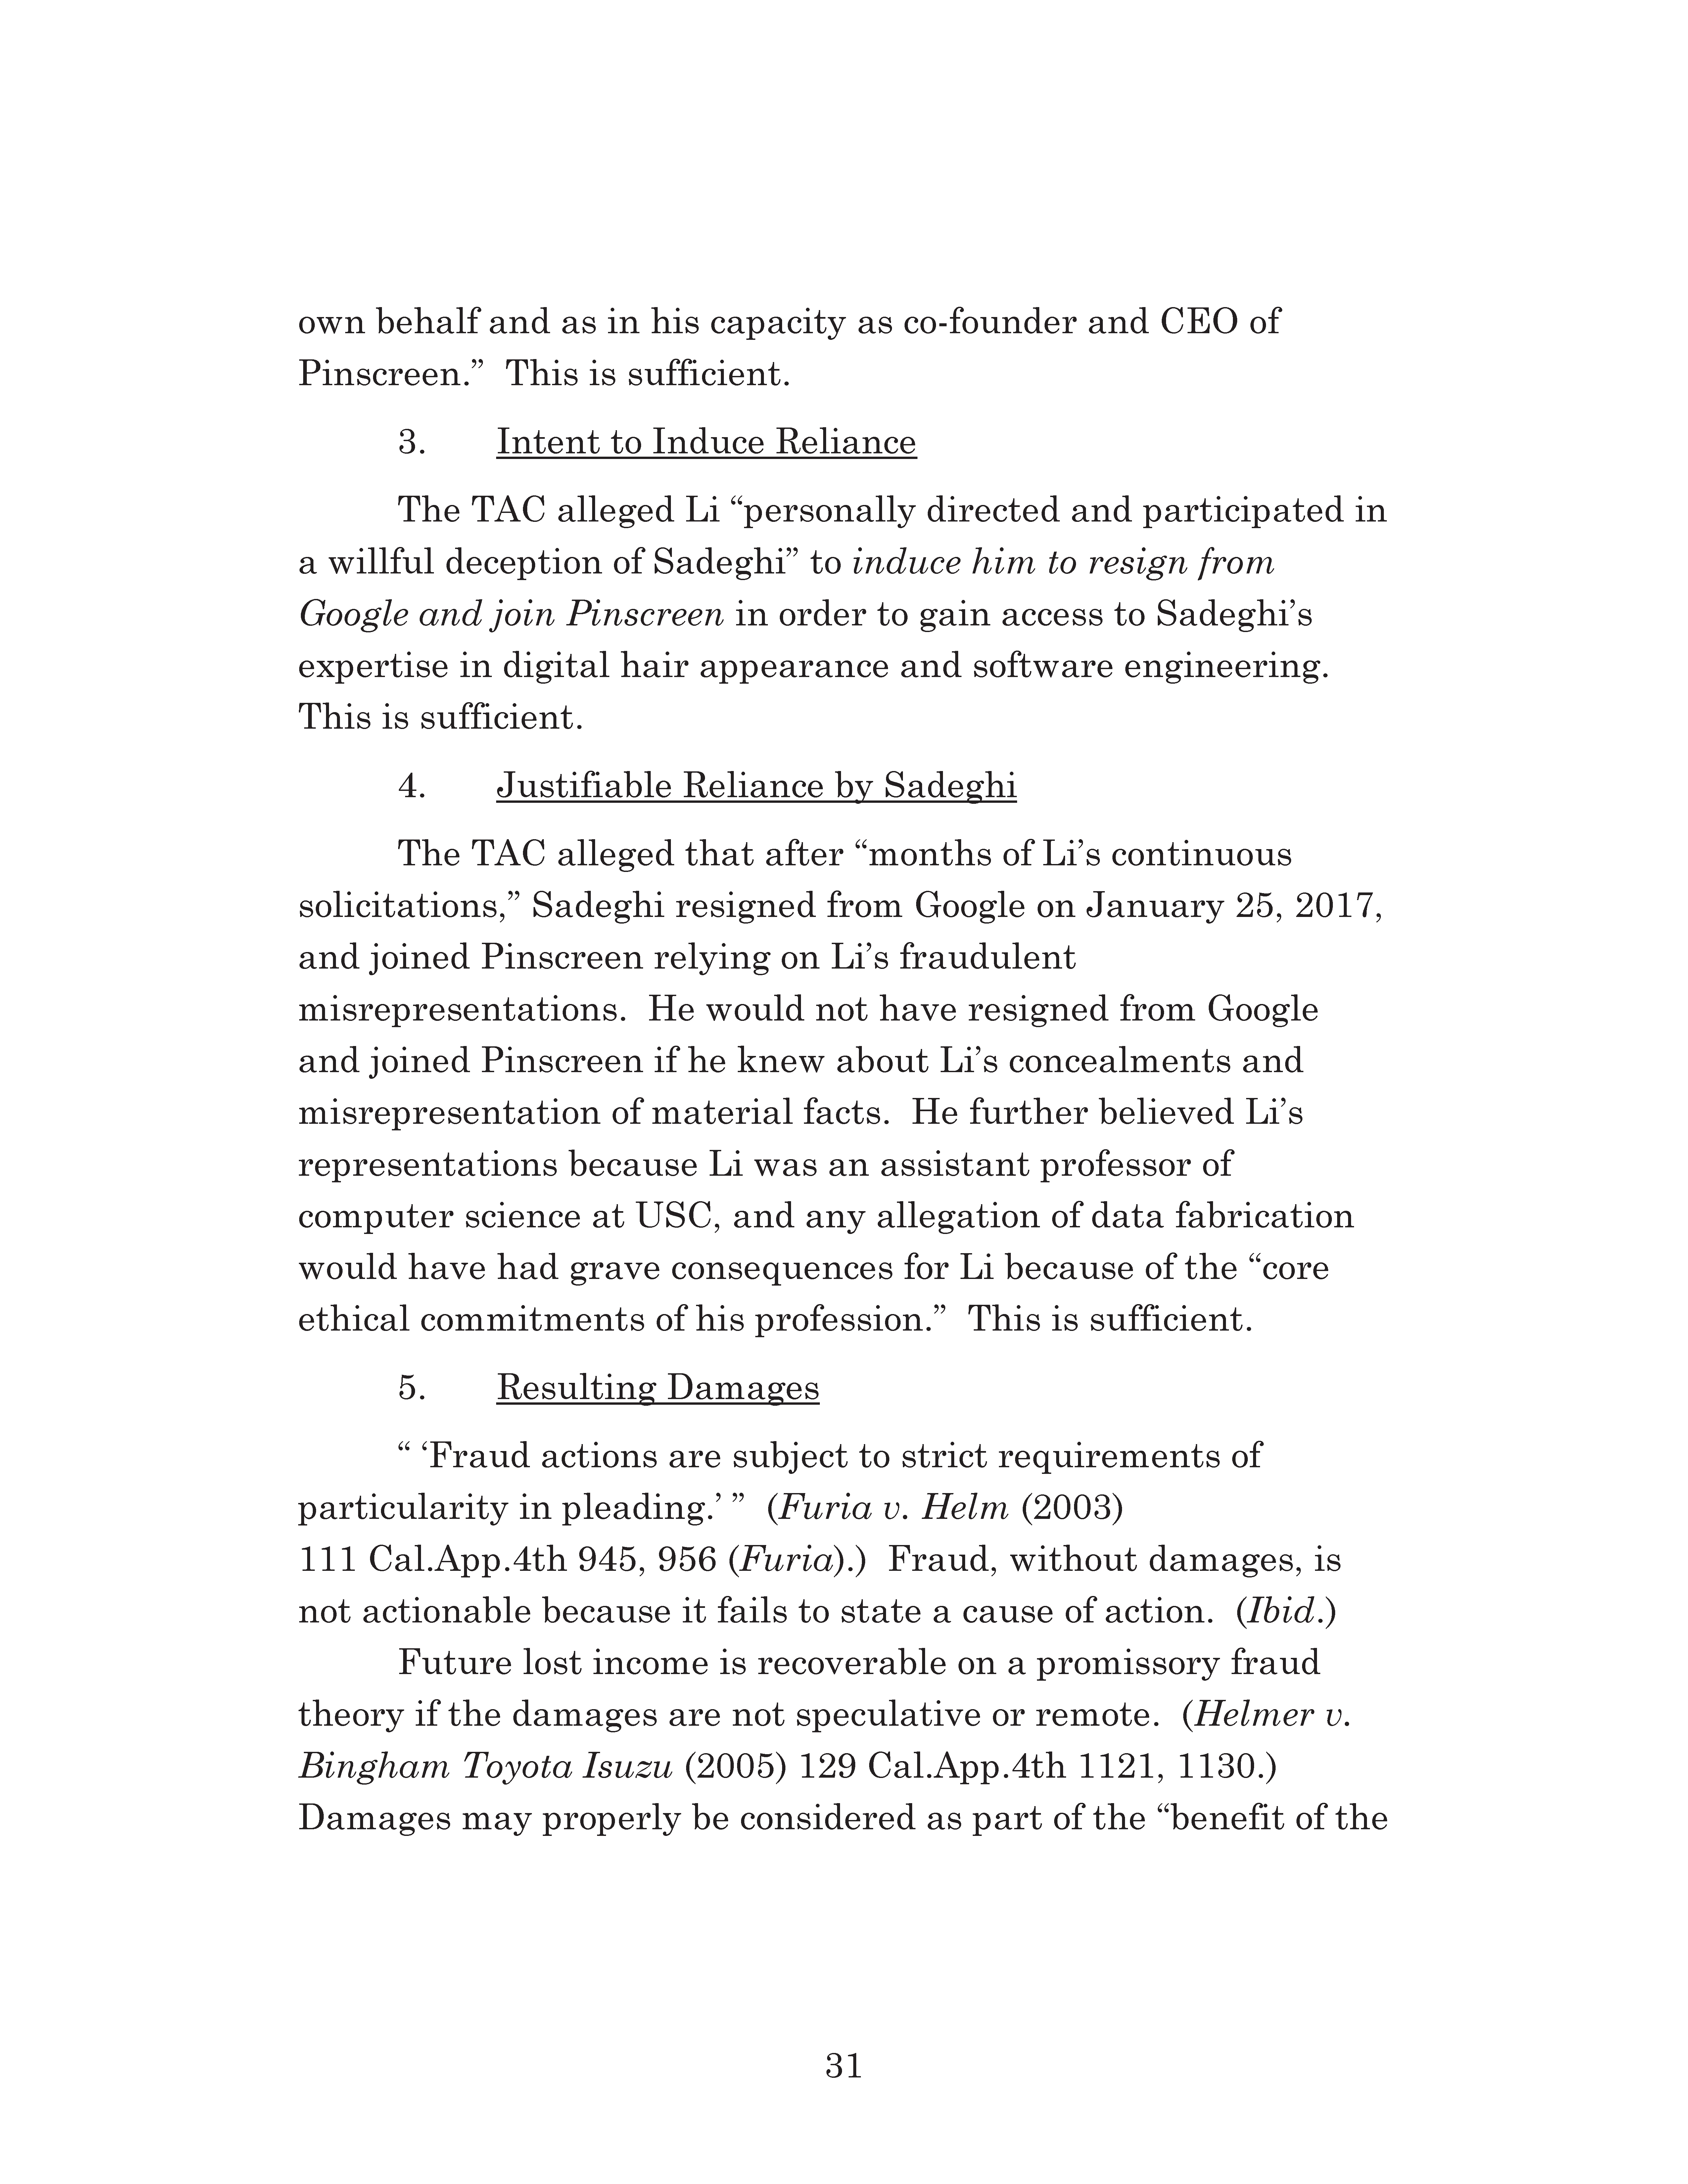 Appellate Court's Opinion Upholding Sadeghi's Claims for Fraud, Battery and IIED Against Li Page 31